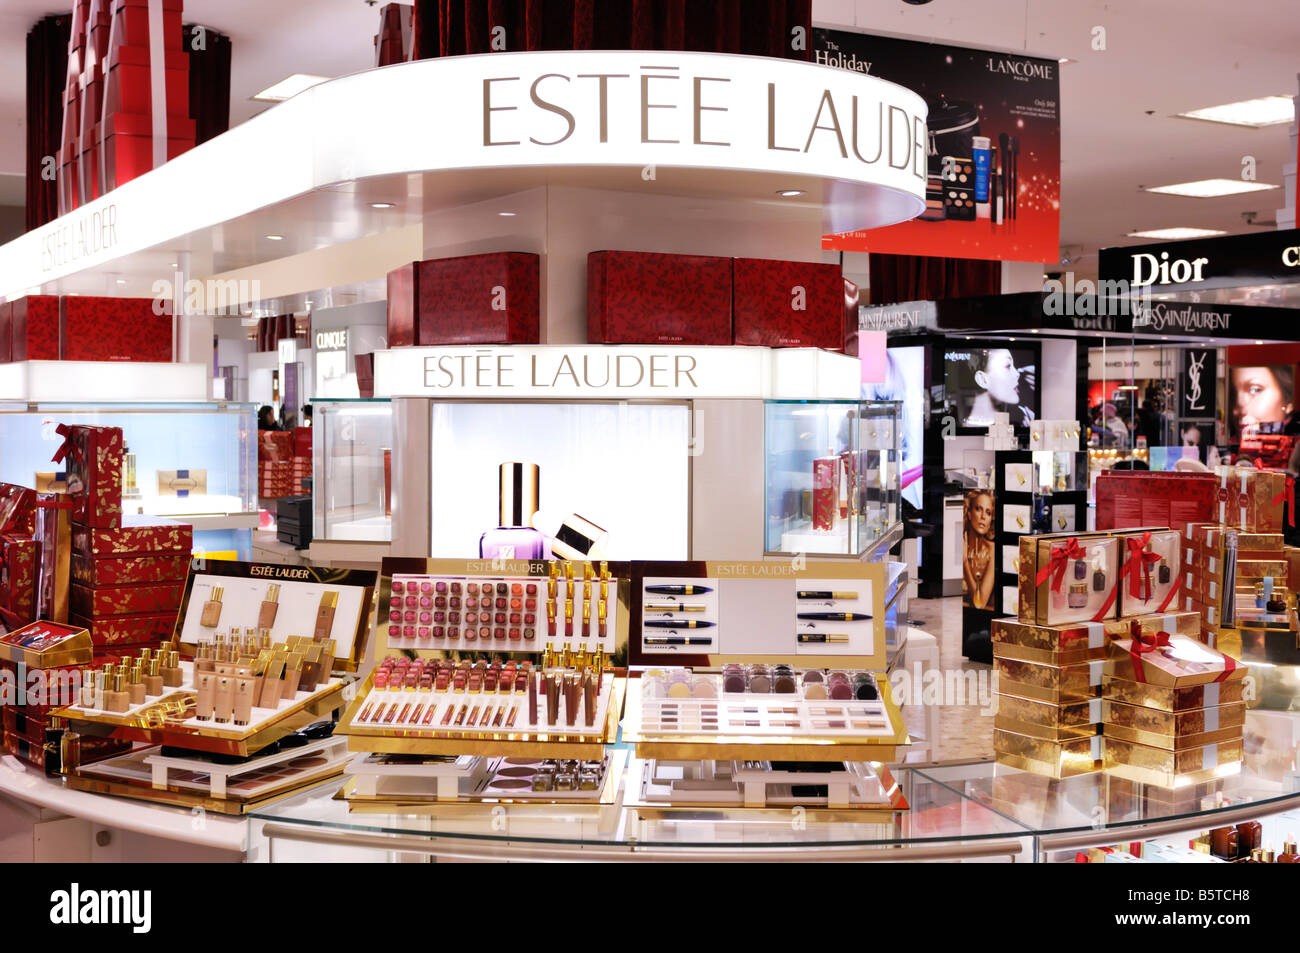 Estee lauder shop hi-res stock photography and - Alamy